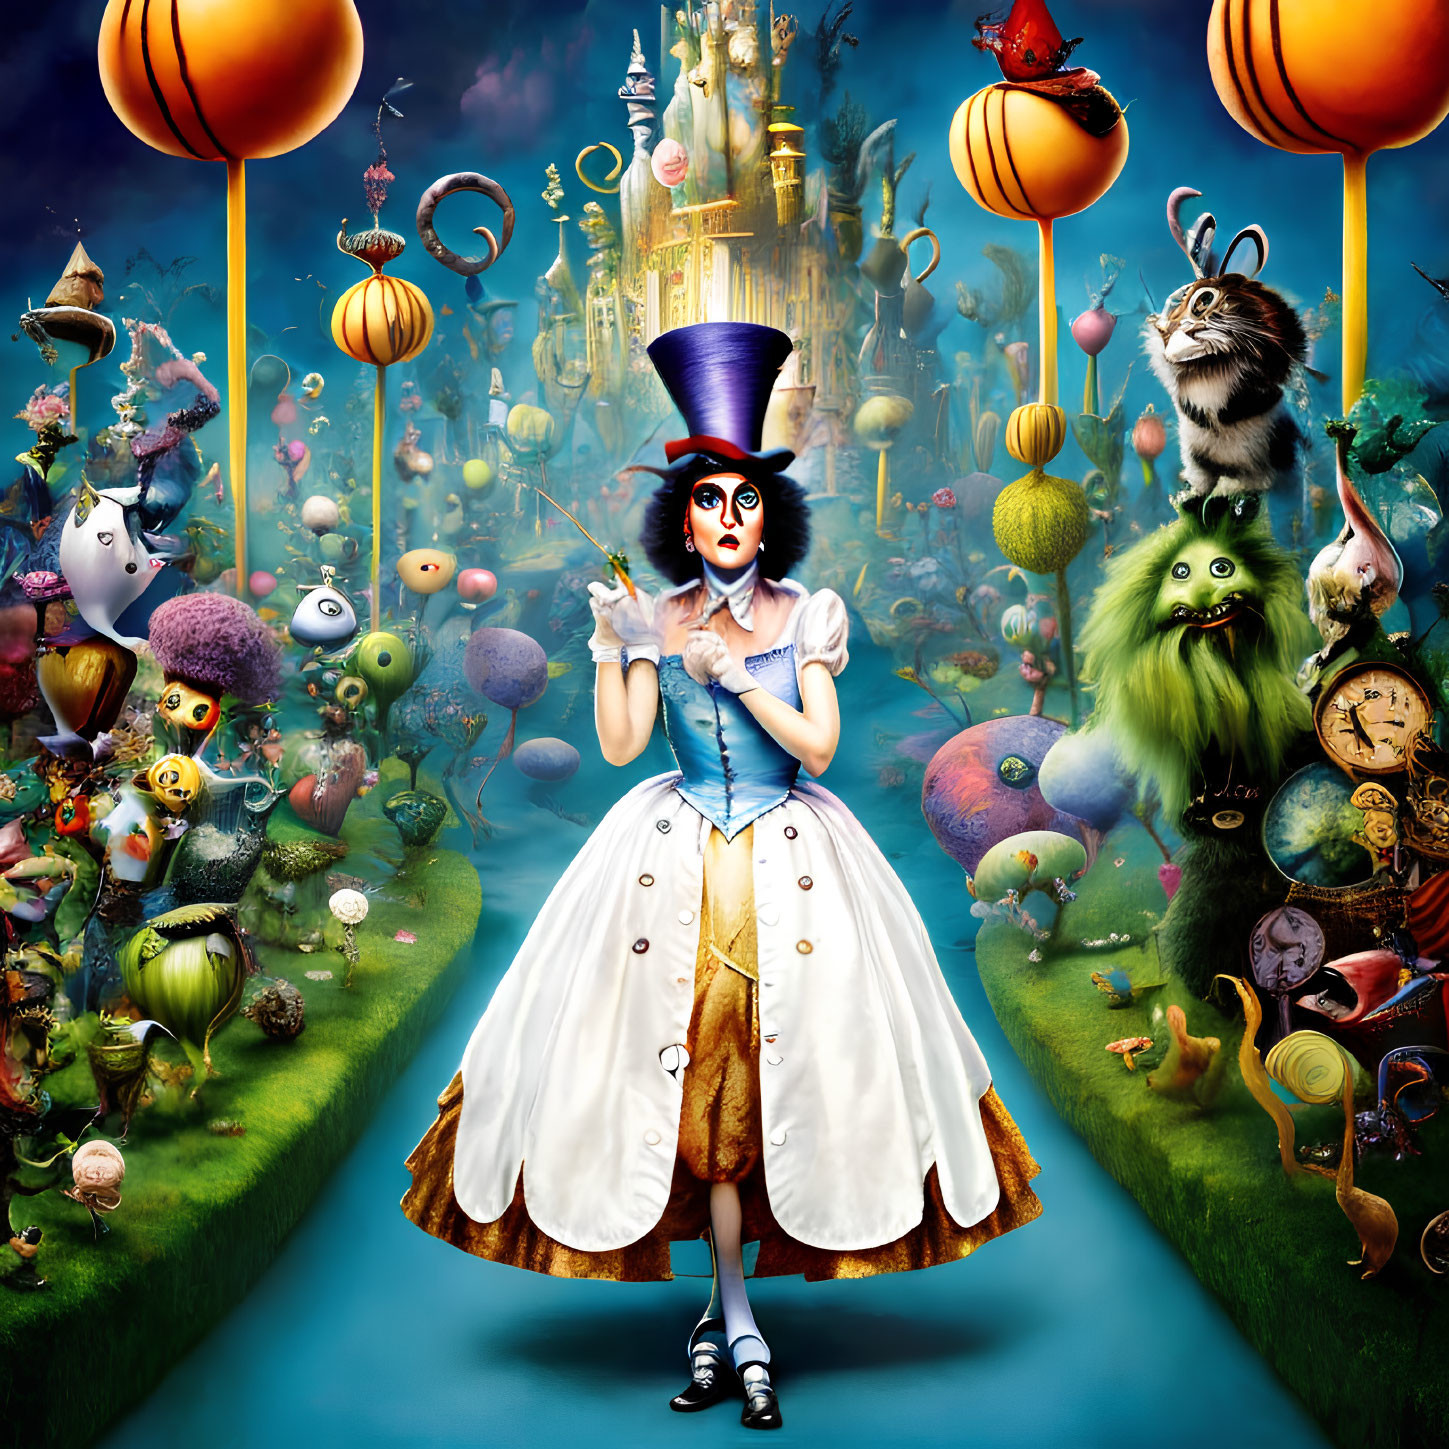 Whimsical girl in hat with fantastical creatures from Alice in Wonderland